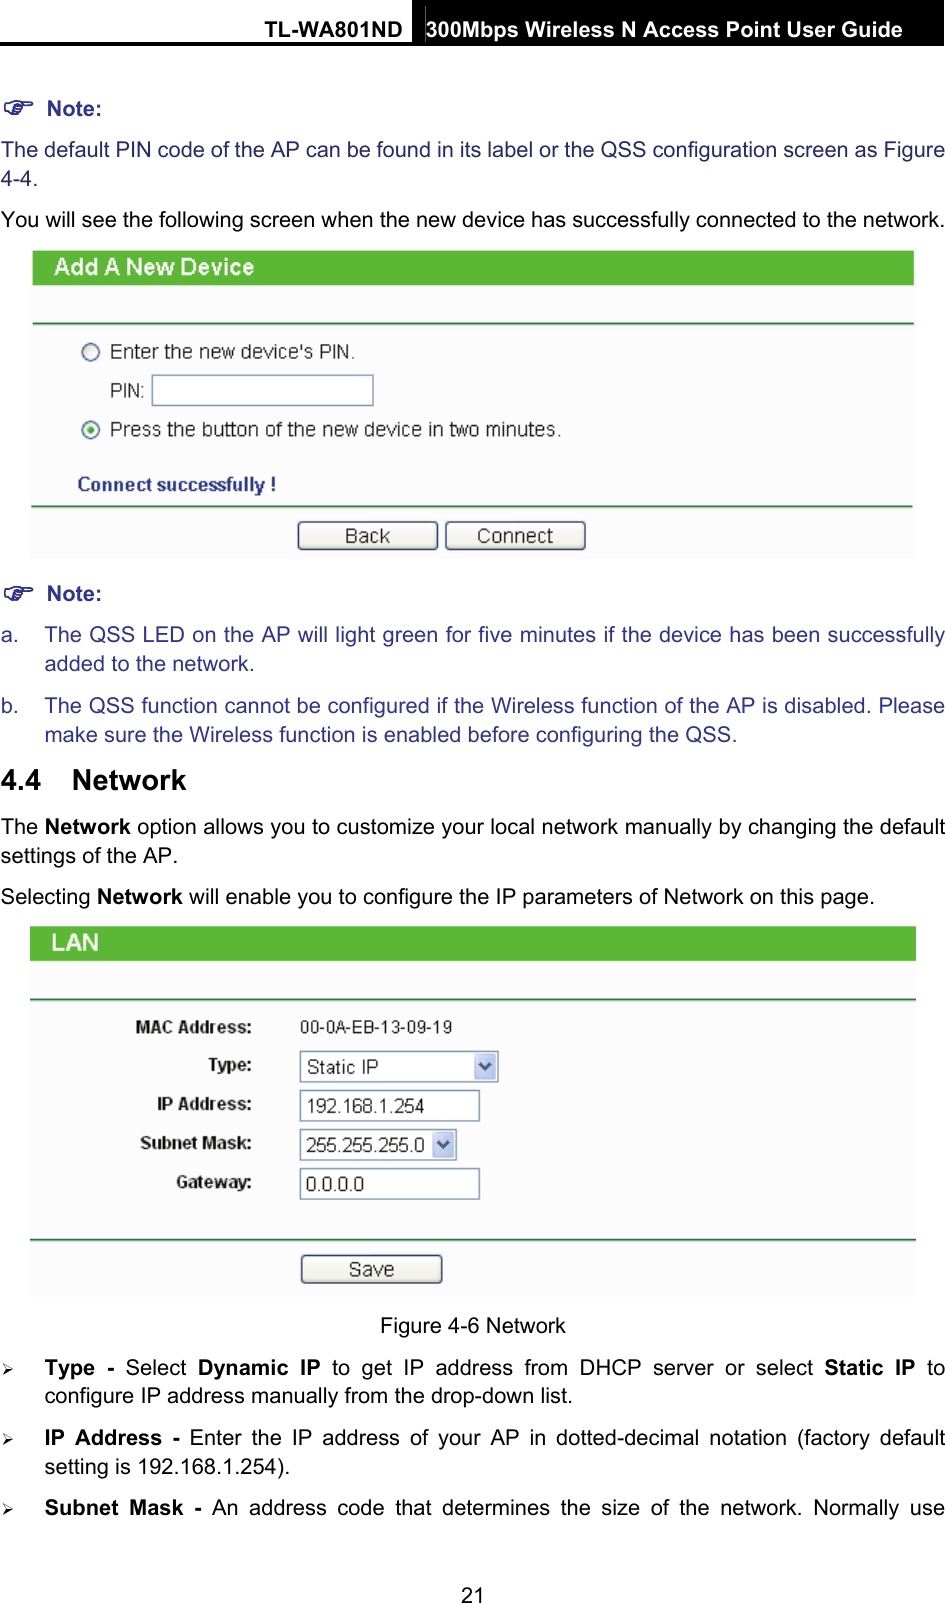 TL-WA801ND 300Mbps Wireless N Access Point User Guide  21 ) Note: The default PIN code of the AP can be found in its label or the QSS configuration screen as Figure 4-4. You will see the following screen when the new device has successfully connected to the network.  ) Note: a.  The QSS LED on the AP will light green for five minutes if the device has been successfully added to the network. b.  The QSS function cannot be configured if the Wireless function of the AP is disabled. Please make sure the Wireless function is enabled before configuring the QSS. 4.4  Network The Network option allows you to customize your local network manually by changing the default settings of the AP. Selecting Network will enable you to configure the IP parameters of Network on this page.  Figure 4-6 Network ¾ Type - Select Dynamic IP to get IP address from DHCP server or select Static IP to configure IP address manually from the drop-down list.   ¾ IP Address - Enter the IP address of your AP in dotted-decimal notation (factory default setting is 192.168.1.254). ¾ Subnet Mask - An address code that determines the size of the network. Normally use 